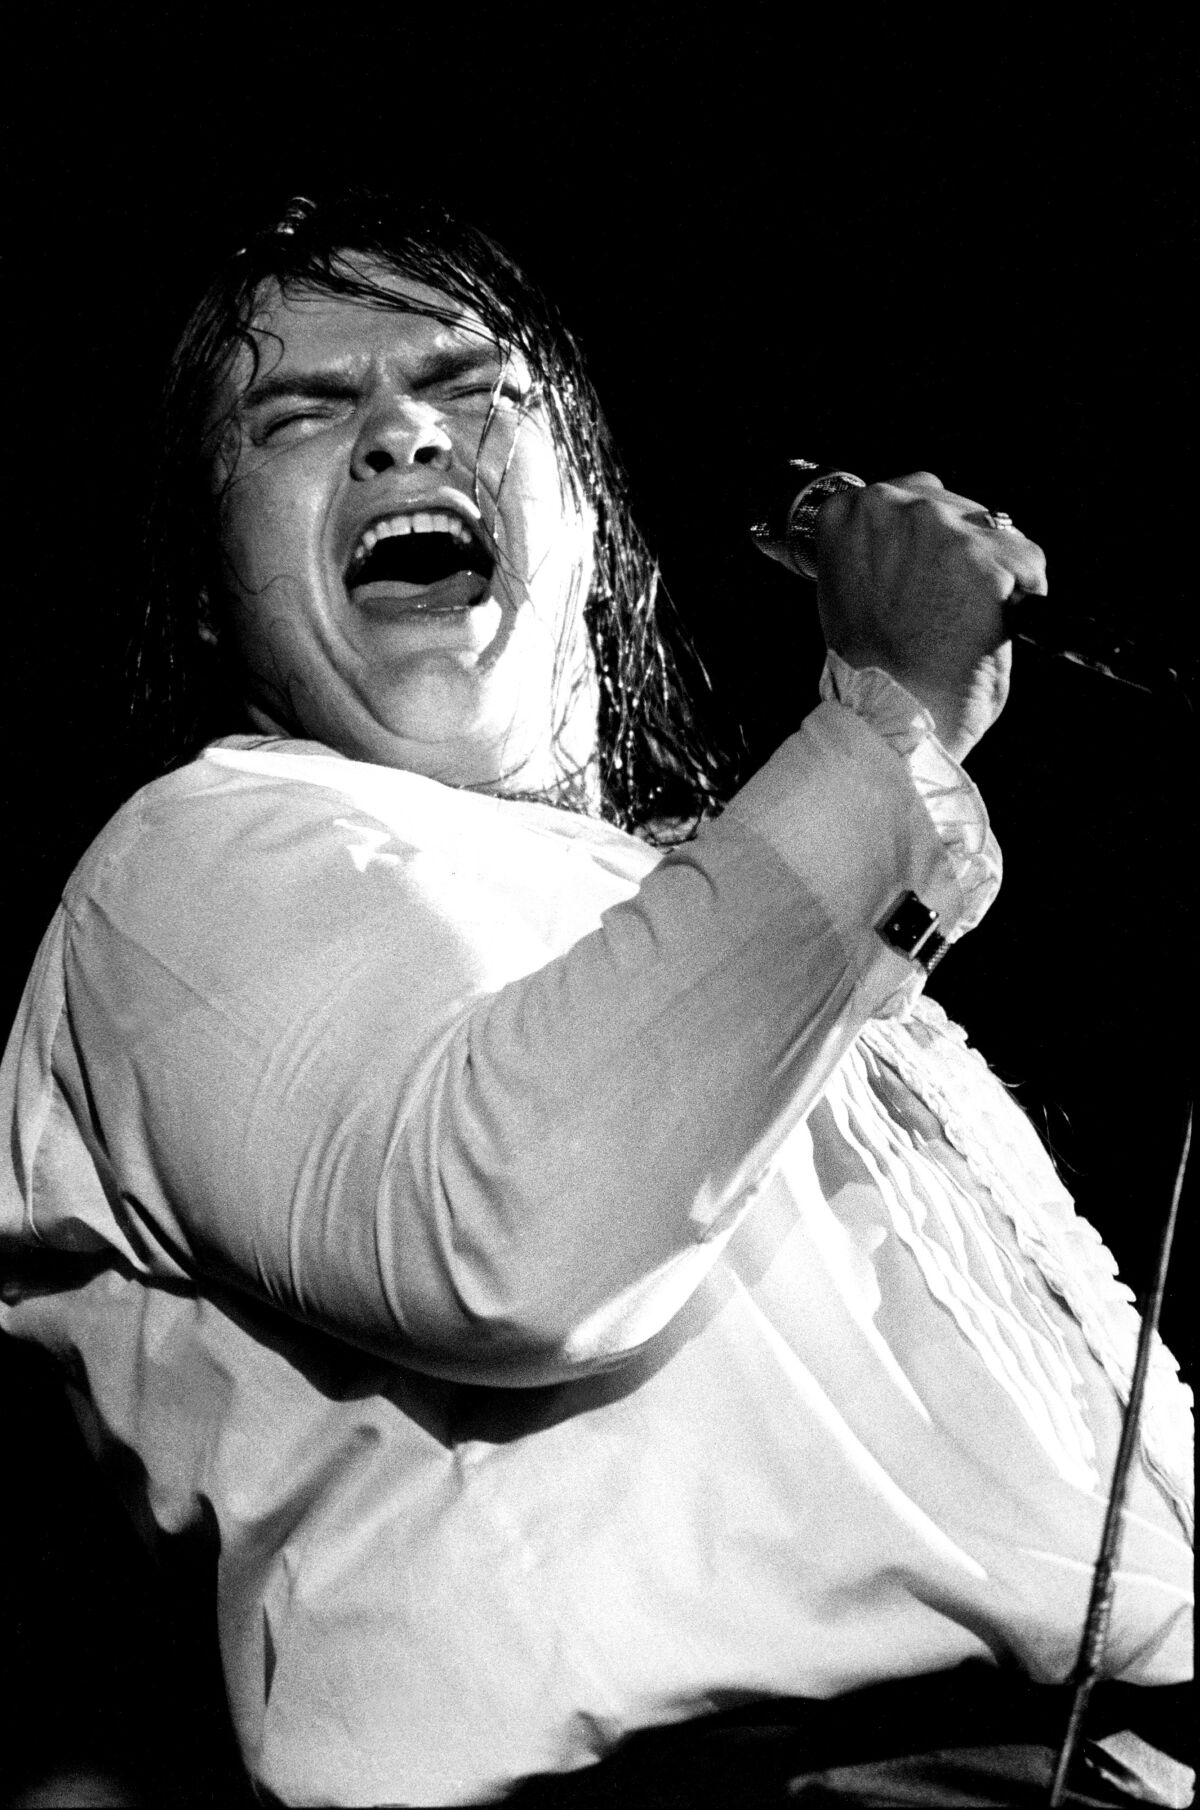 Meat Loaf onstage in 1977.